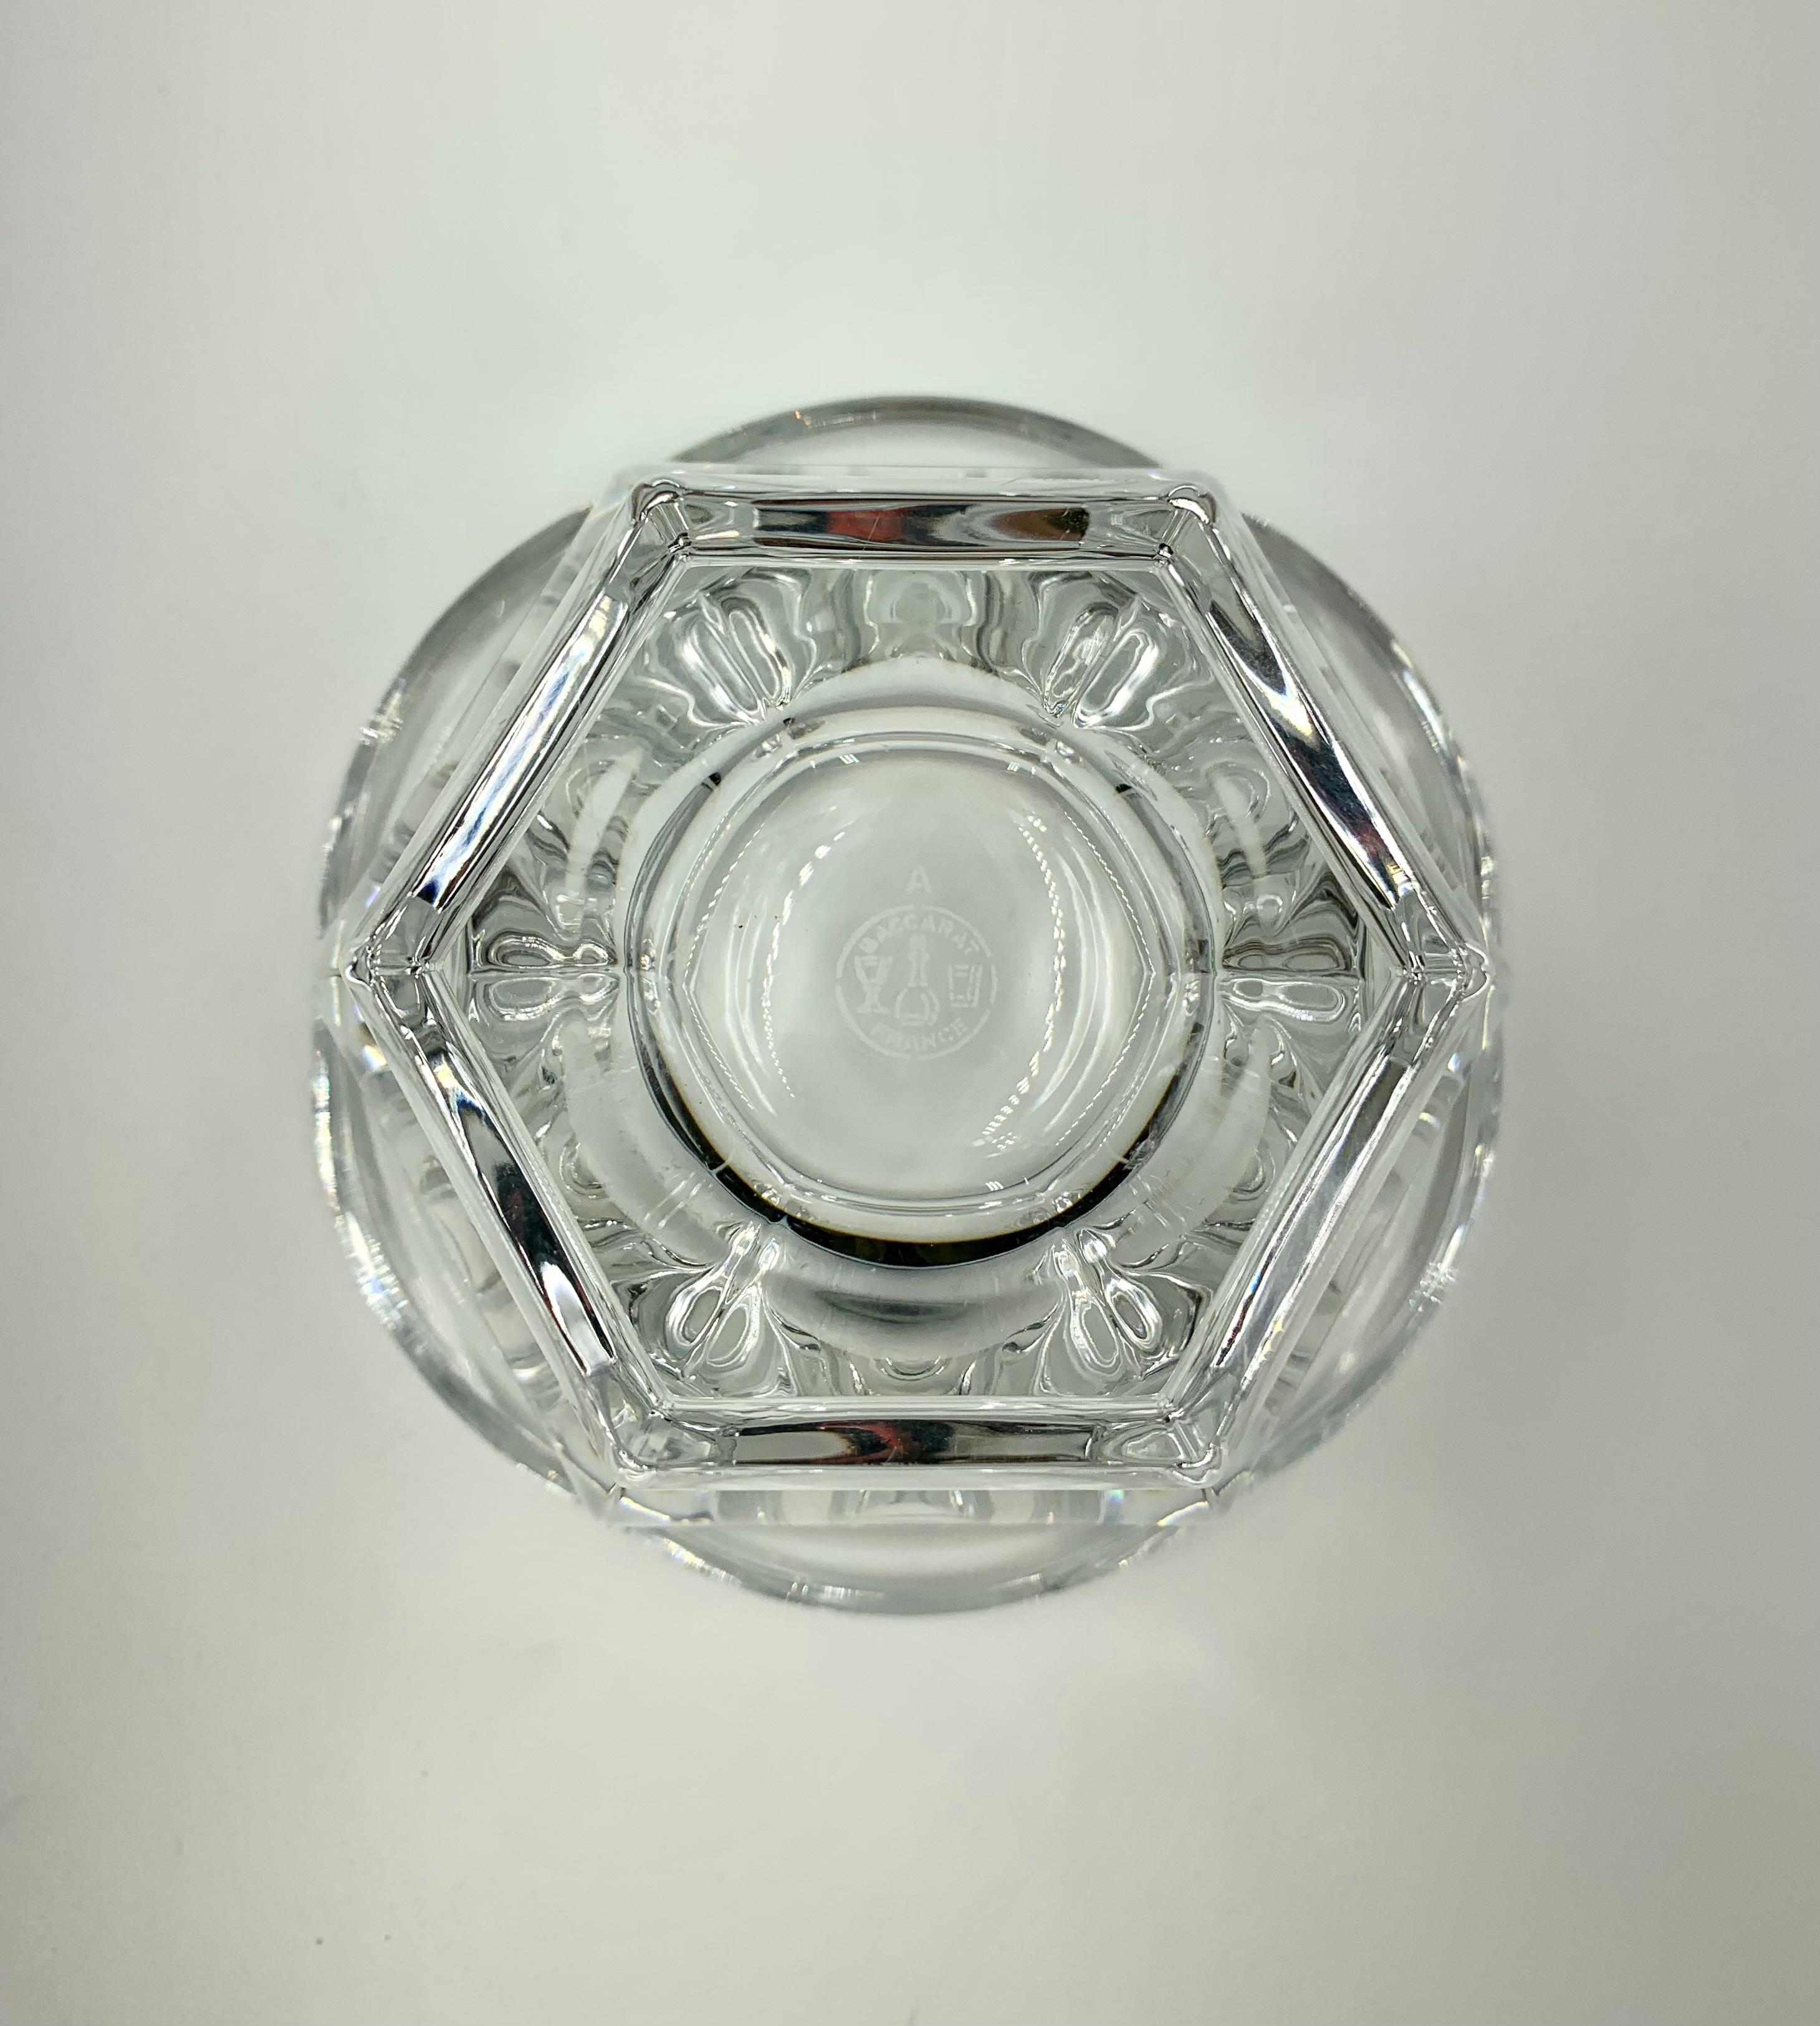 Pristine Baccarat Crystal Harcourt Serving Piece In Excellent Condition For Sale In New York, NY